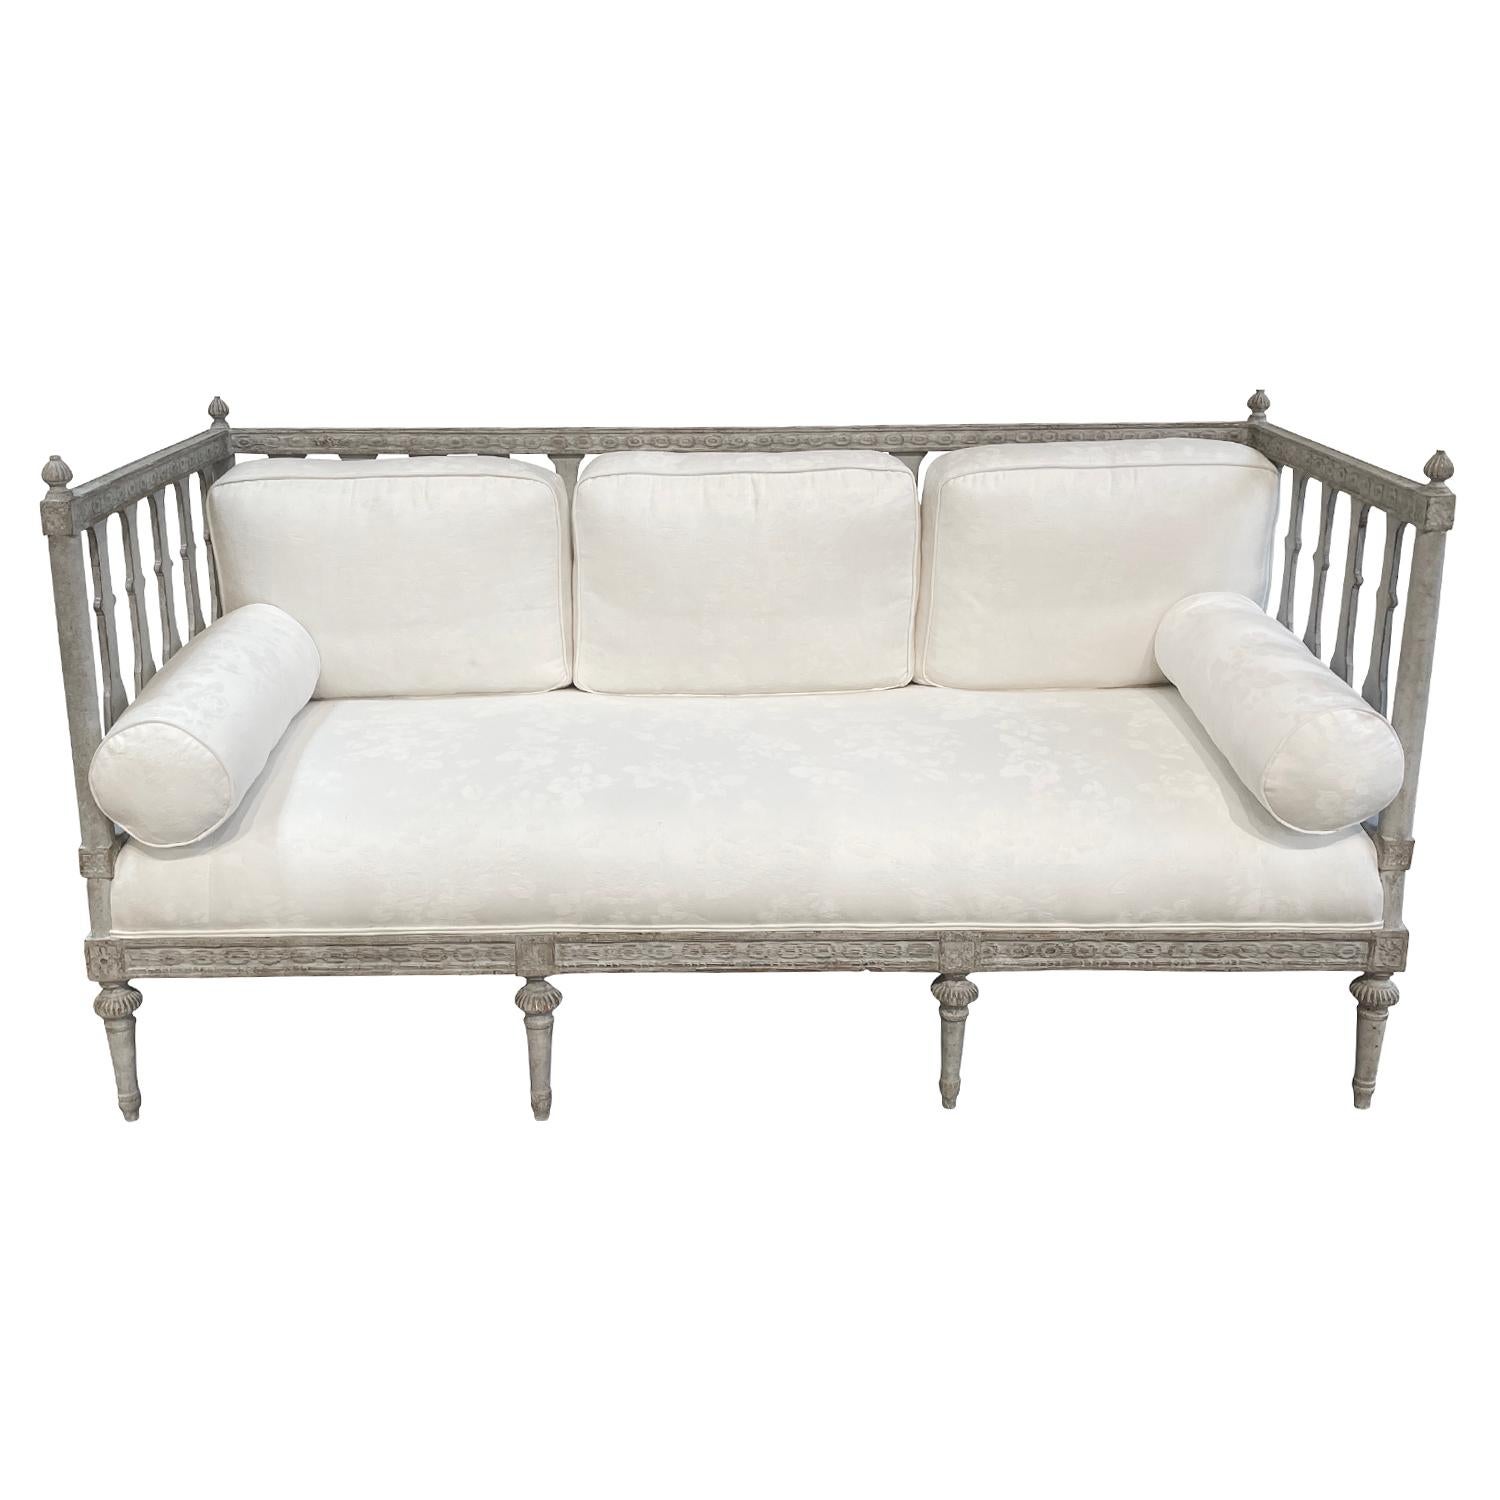 A white-grey, antique Swedish Gustavian sofa bench, daybed with three large back pillows and two round pillows, made of hand carved Pinewood, in good condition. The tall back, side rests of the Scandinavian wood bench is spindled, supported by